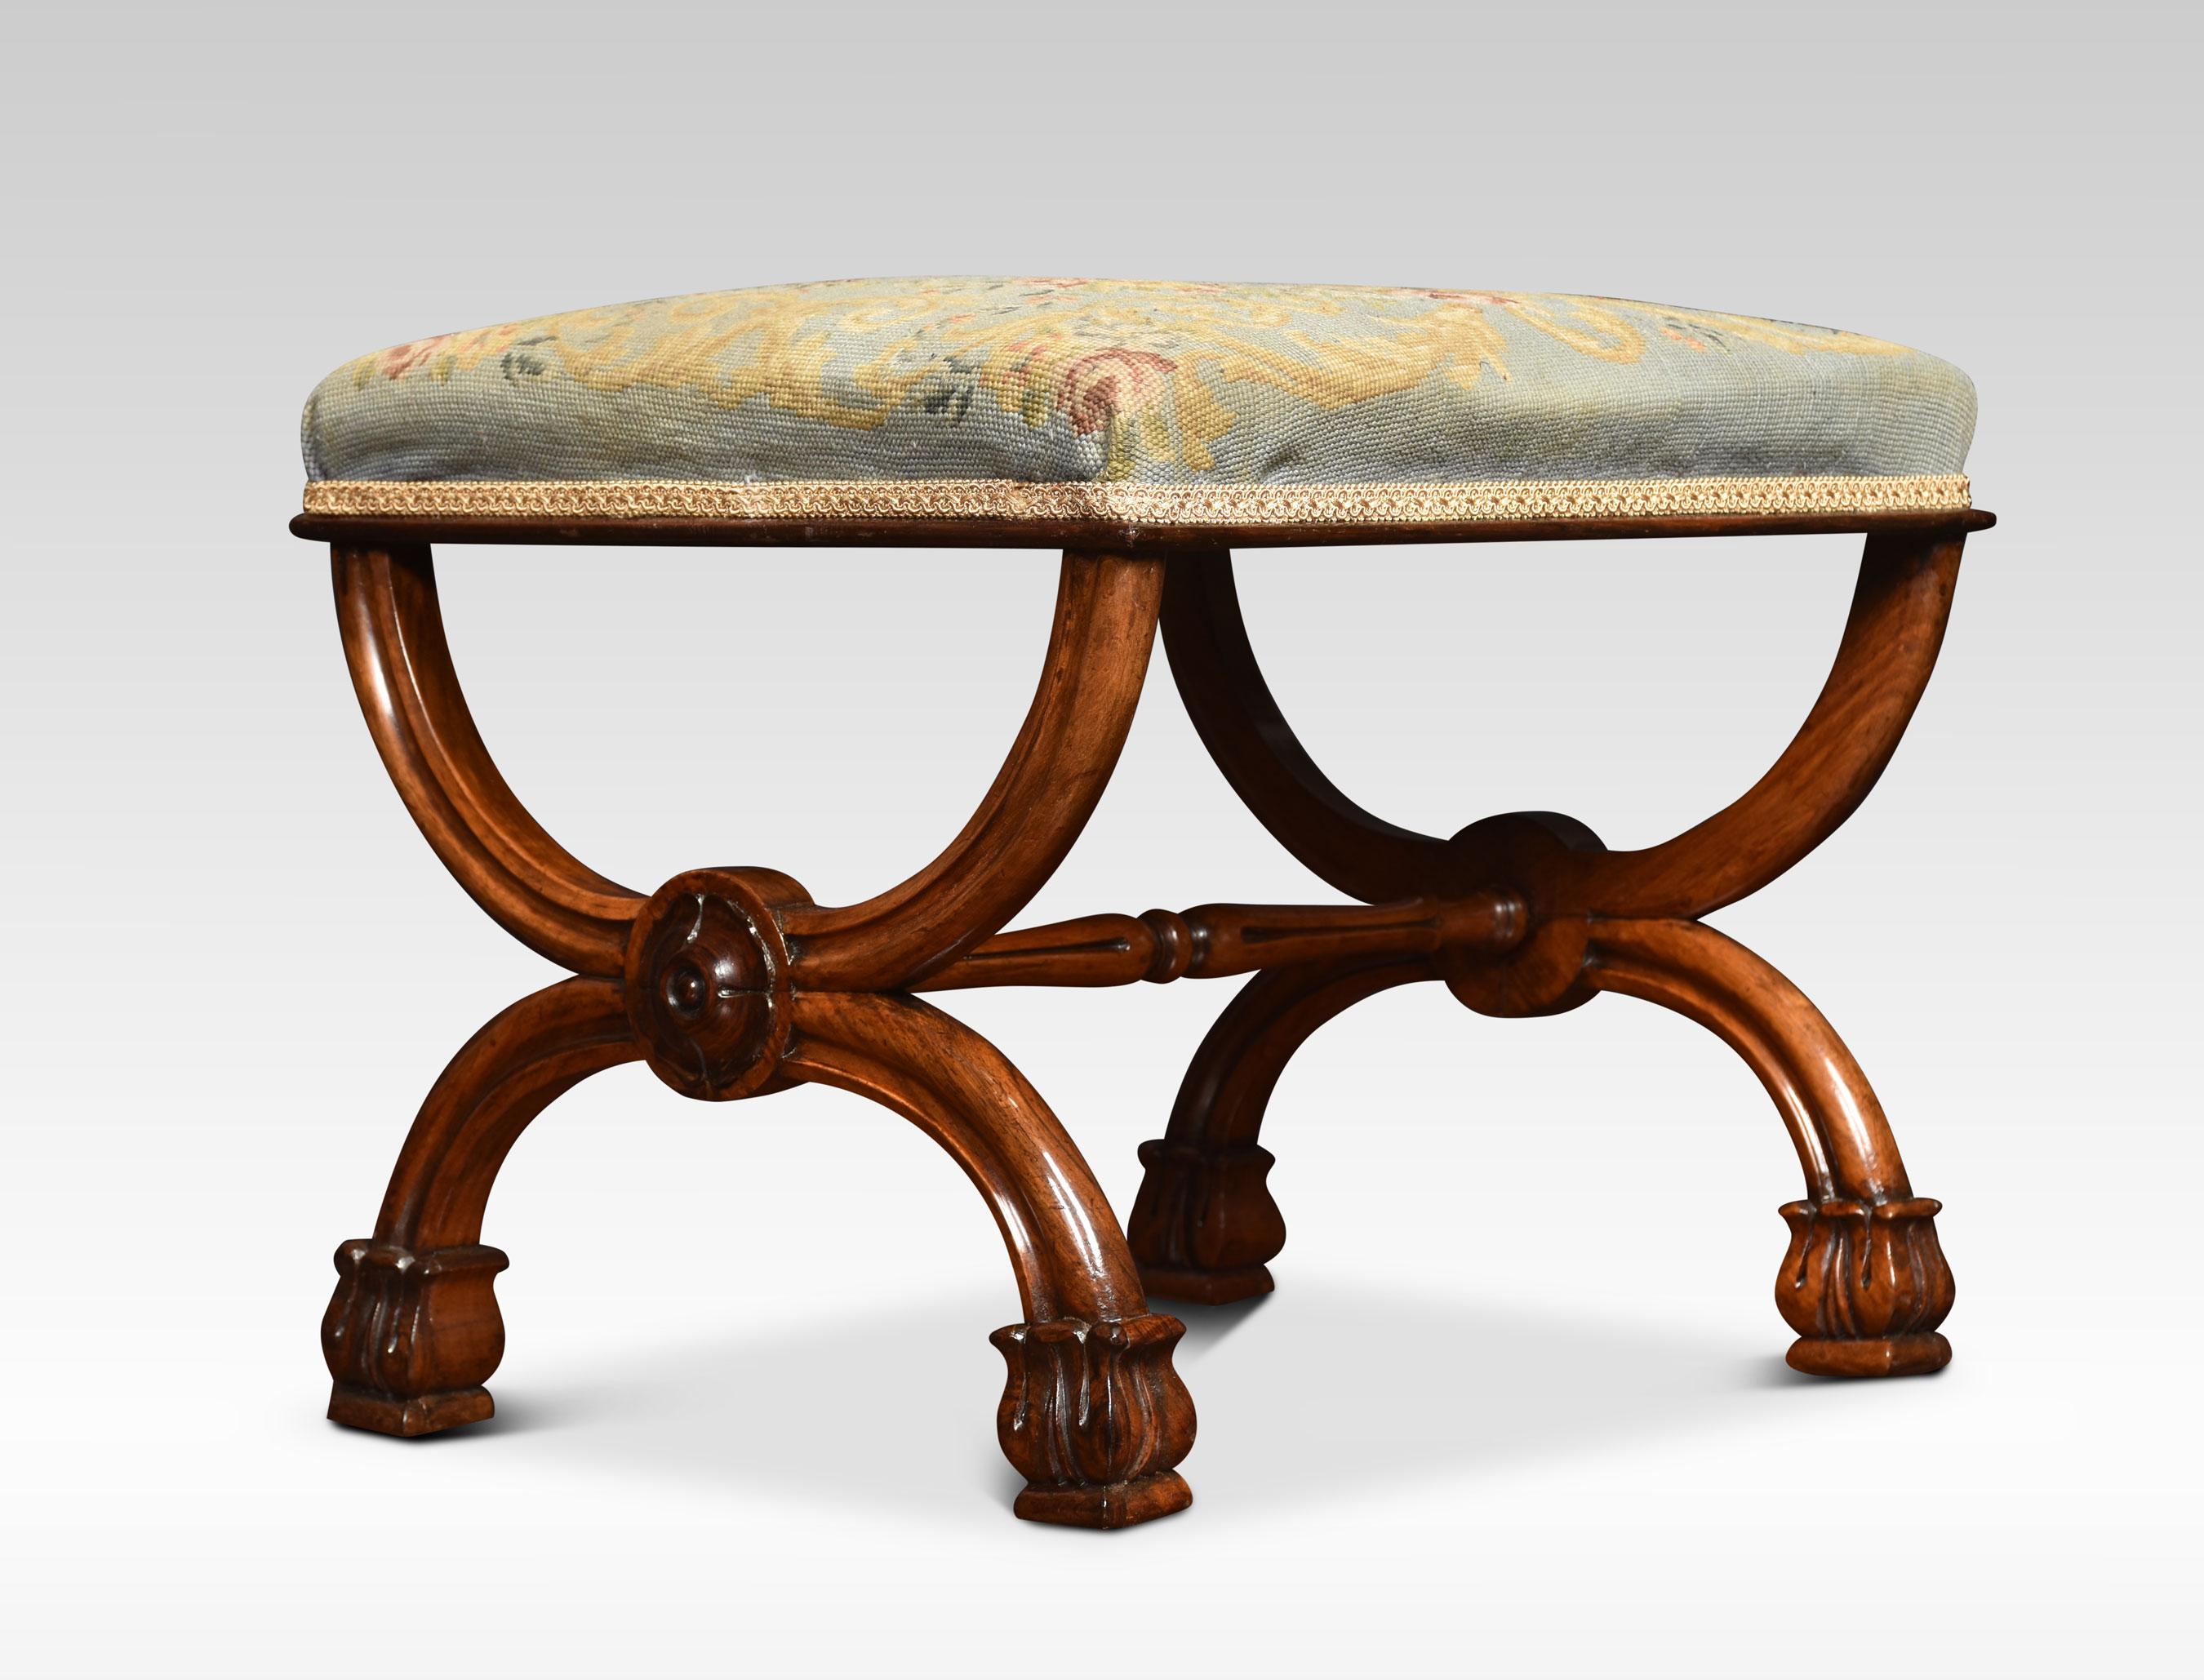 Early 19th century walnut X-frame stool, the needlepoint seat over the moulded frame with a turned stretcher on floral carved feet inited by stretcher.
Dimensions
Height 18 Inches
Width 22 Inches
Depth 18.5 Inches